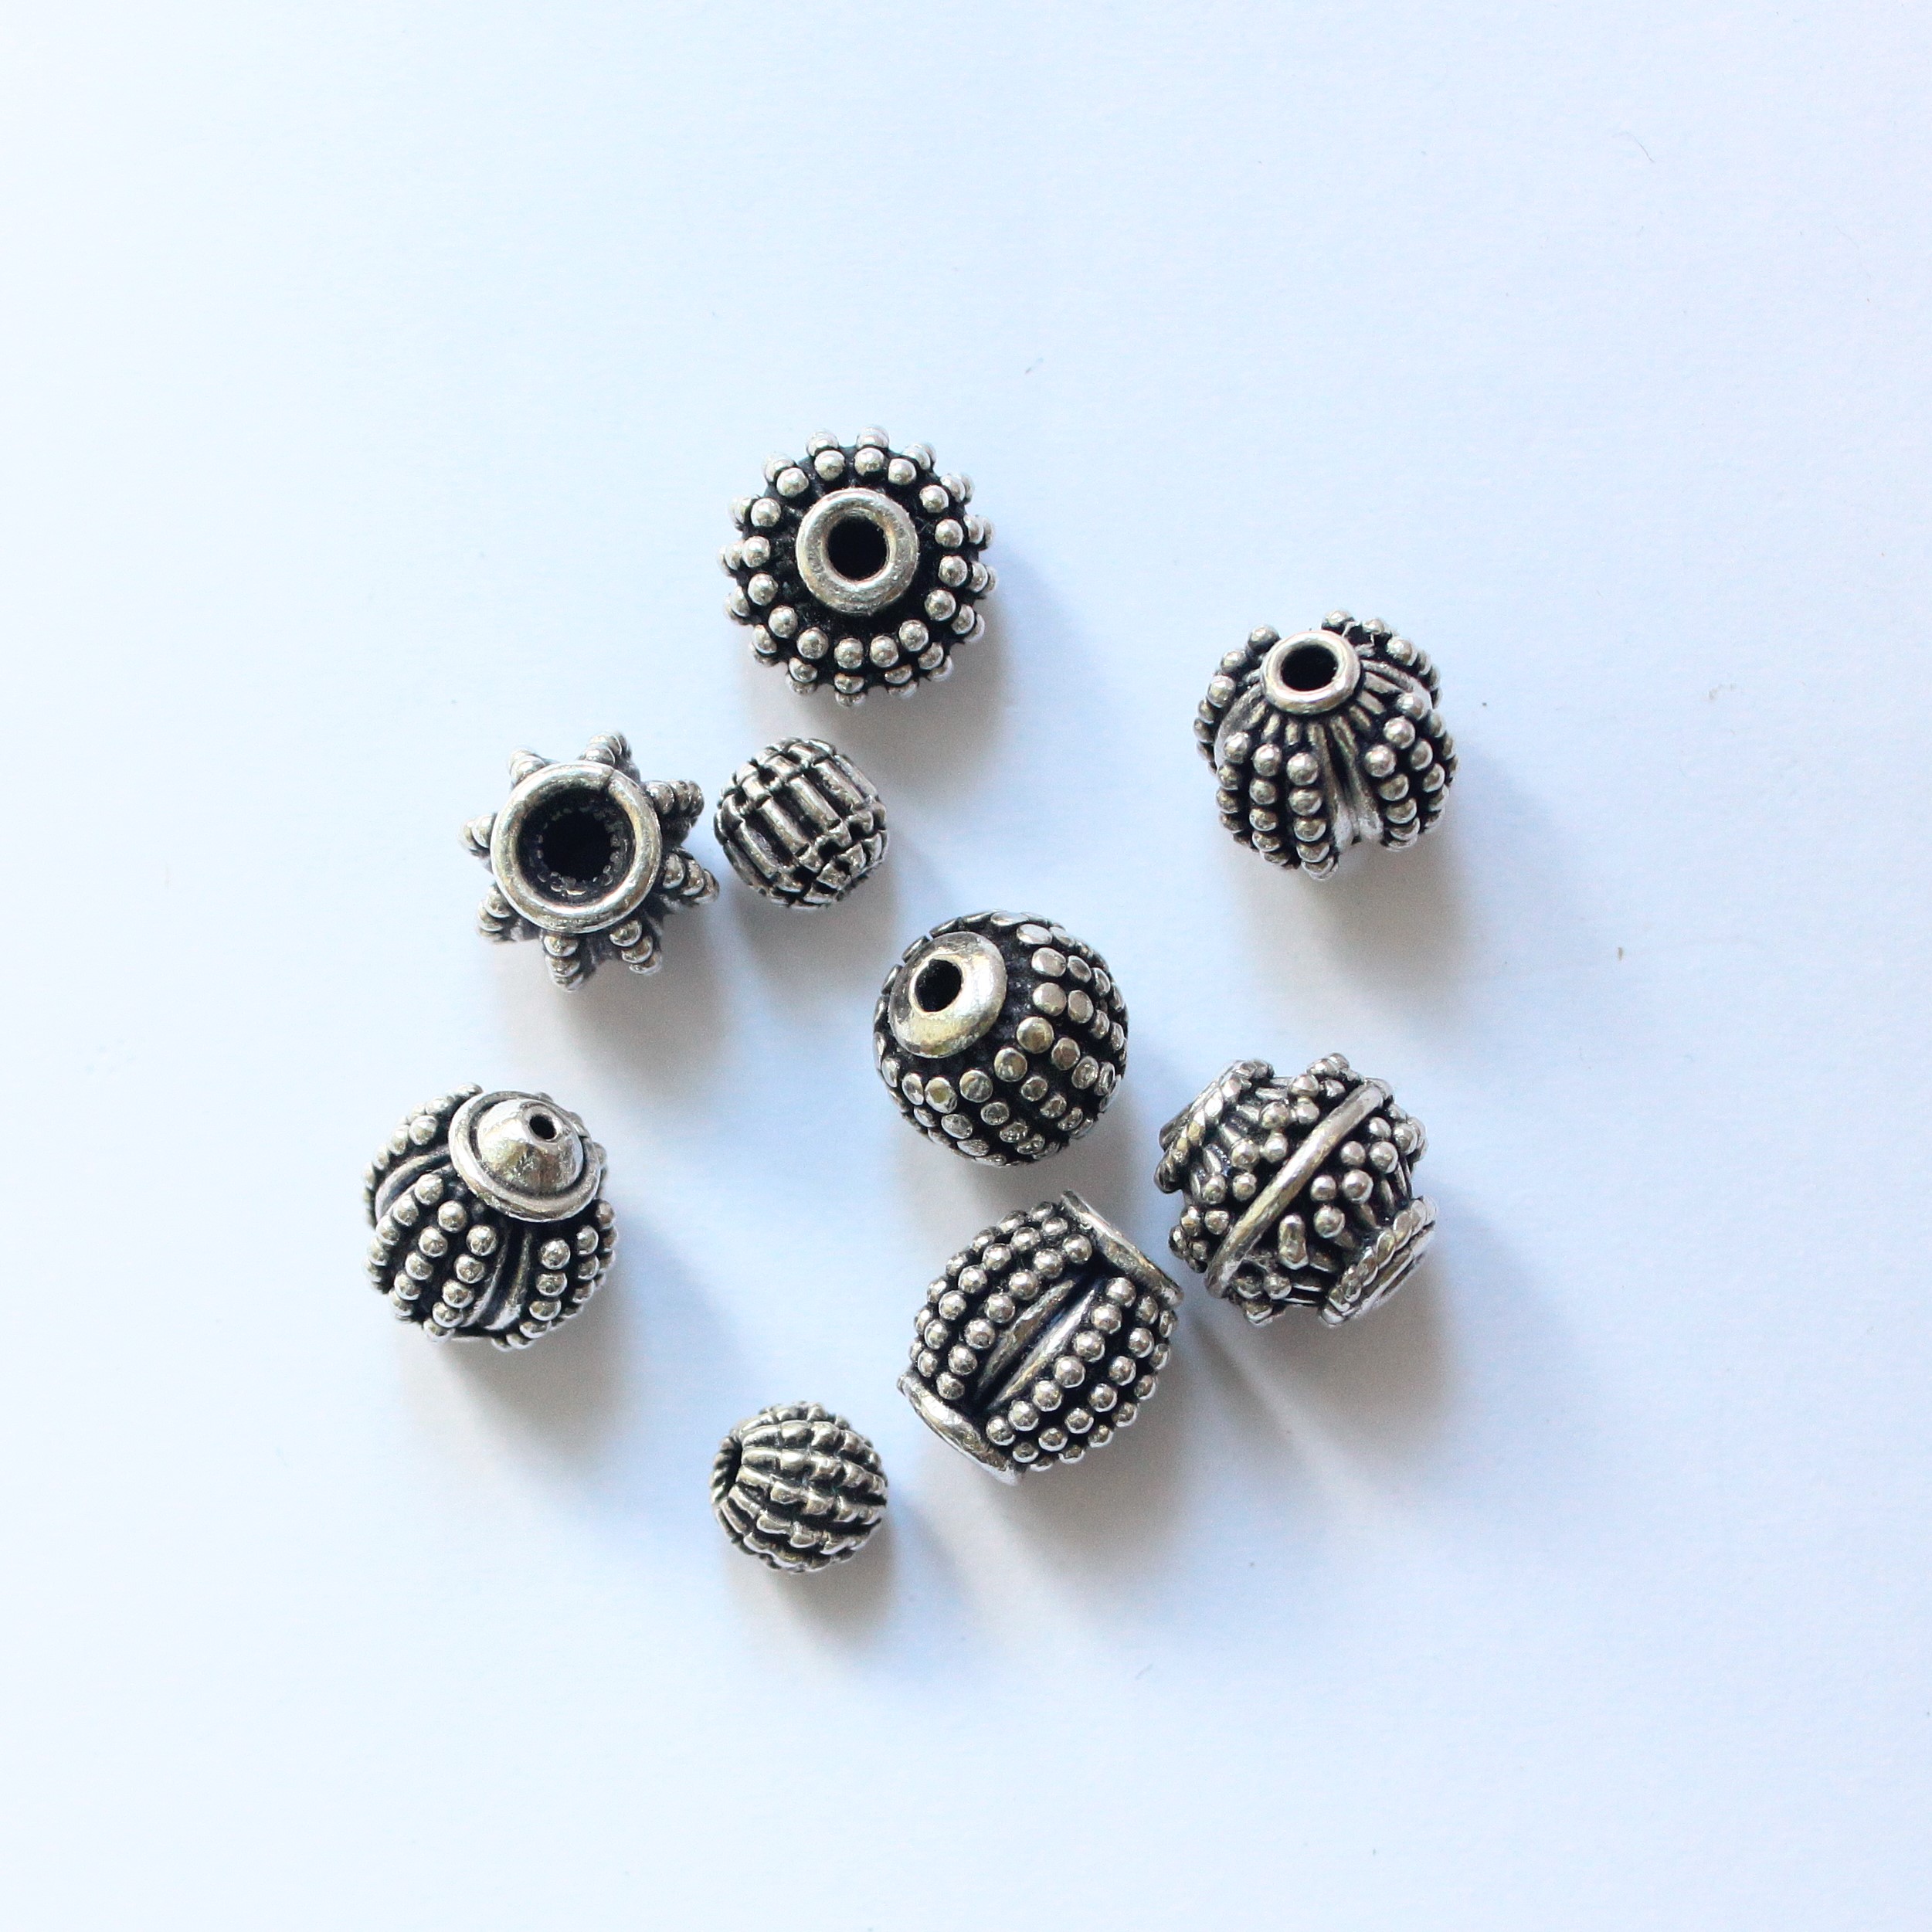 Bali Sterling silver beads, oxidised silver and| GemsRainbowCo